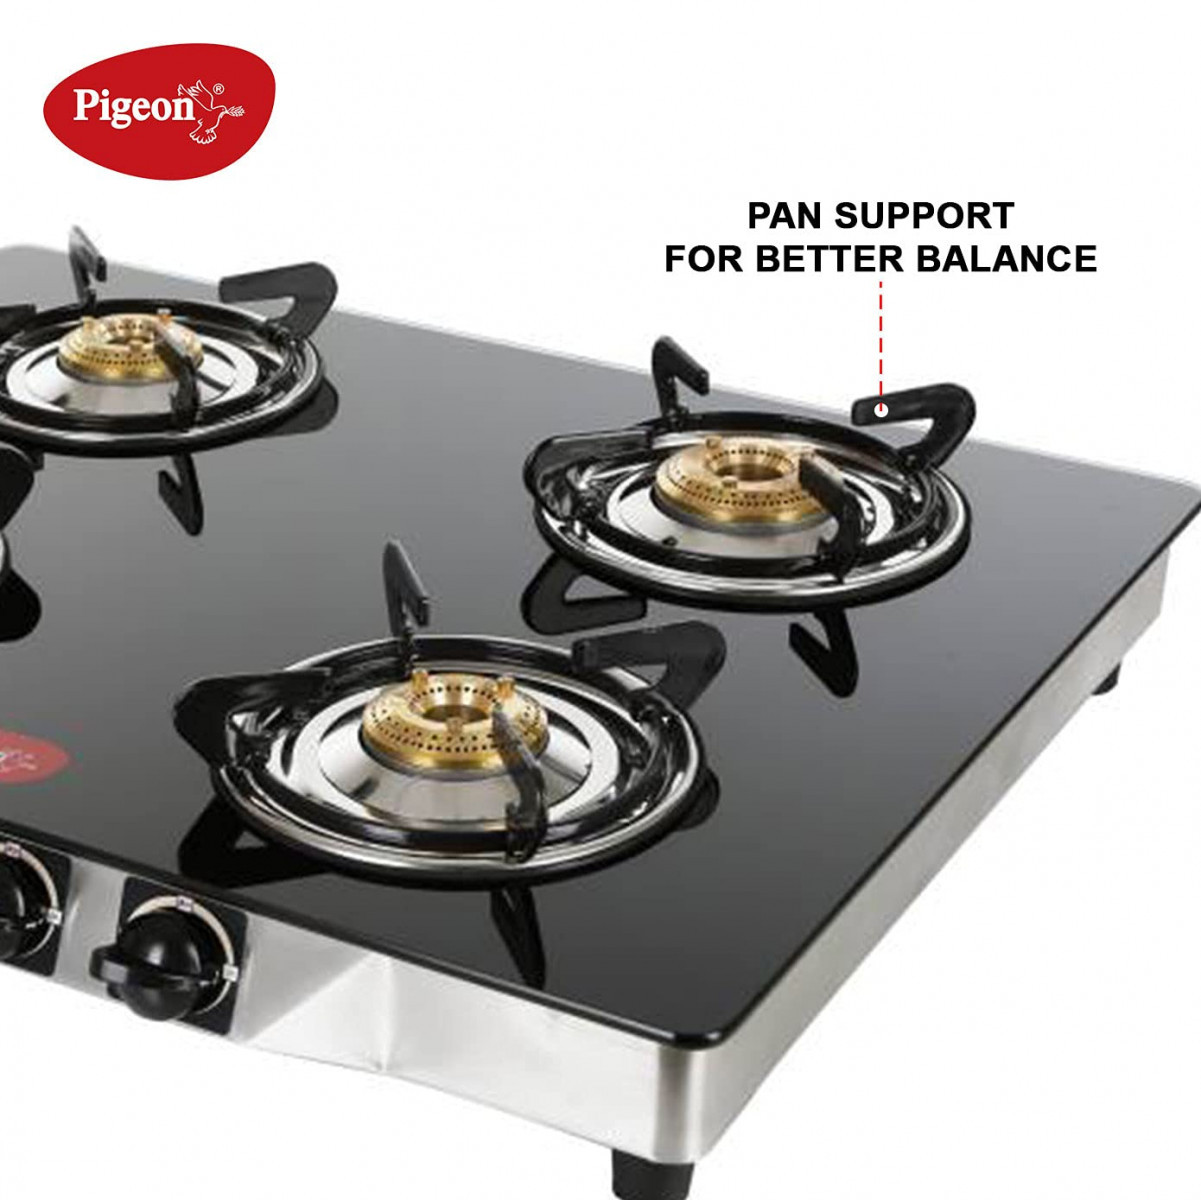 Pigeon by Stovekraft Blaze Gas Stove with High Powered 4 Brass Burner Glass Cooktop